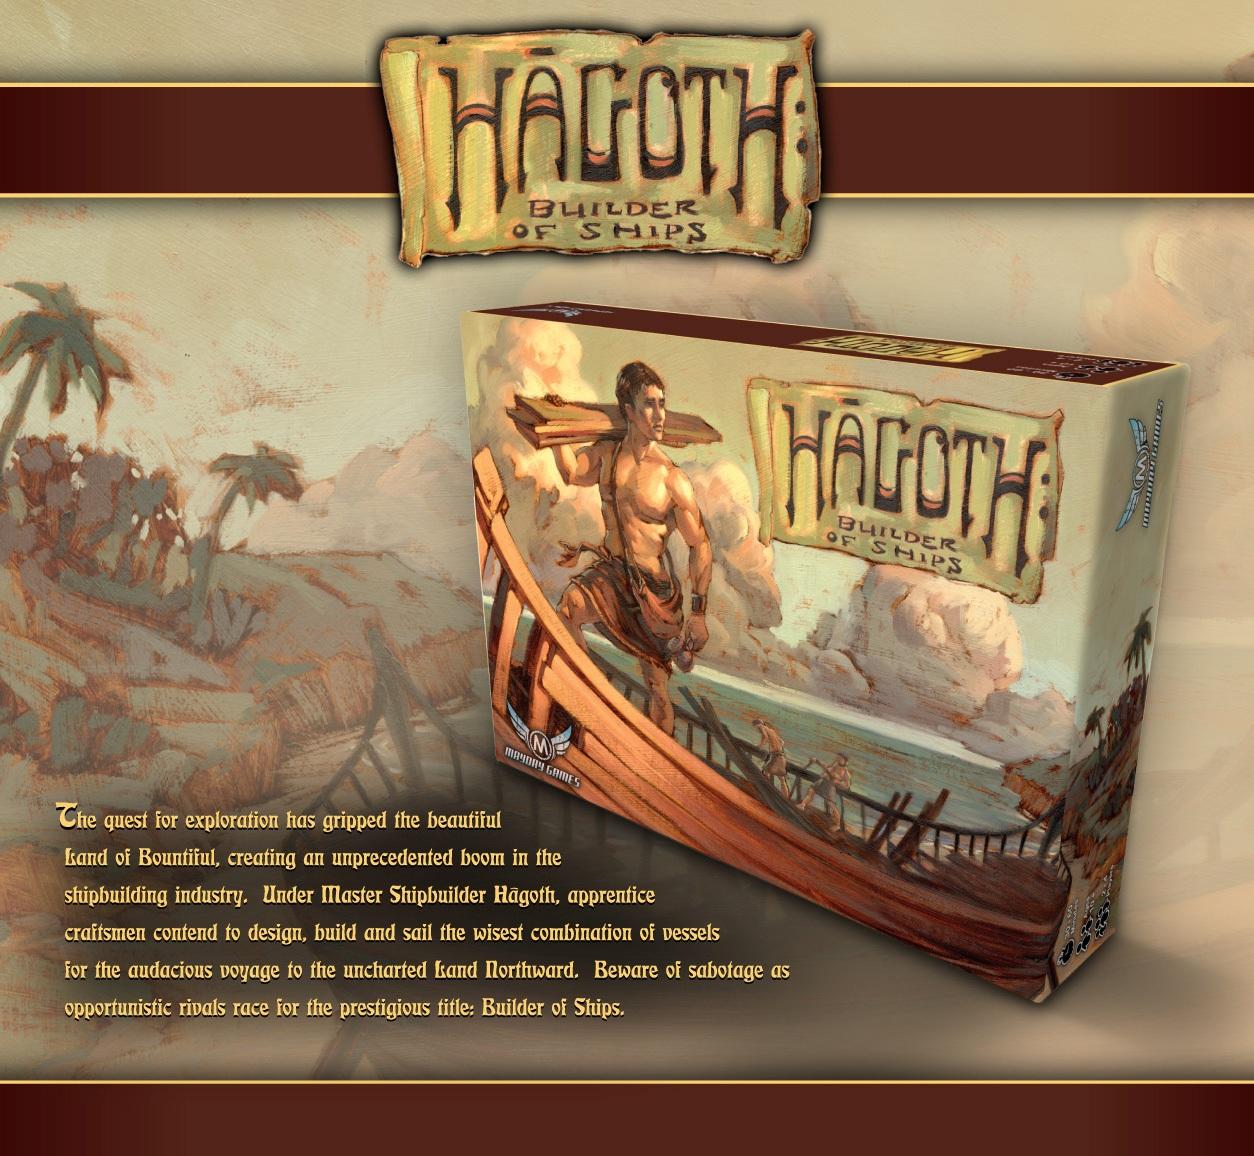 Hagoth: Builder of Ships by Mayday Games